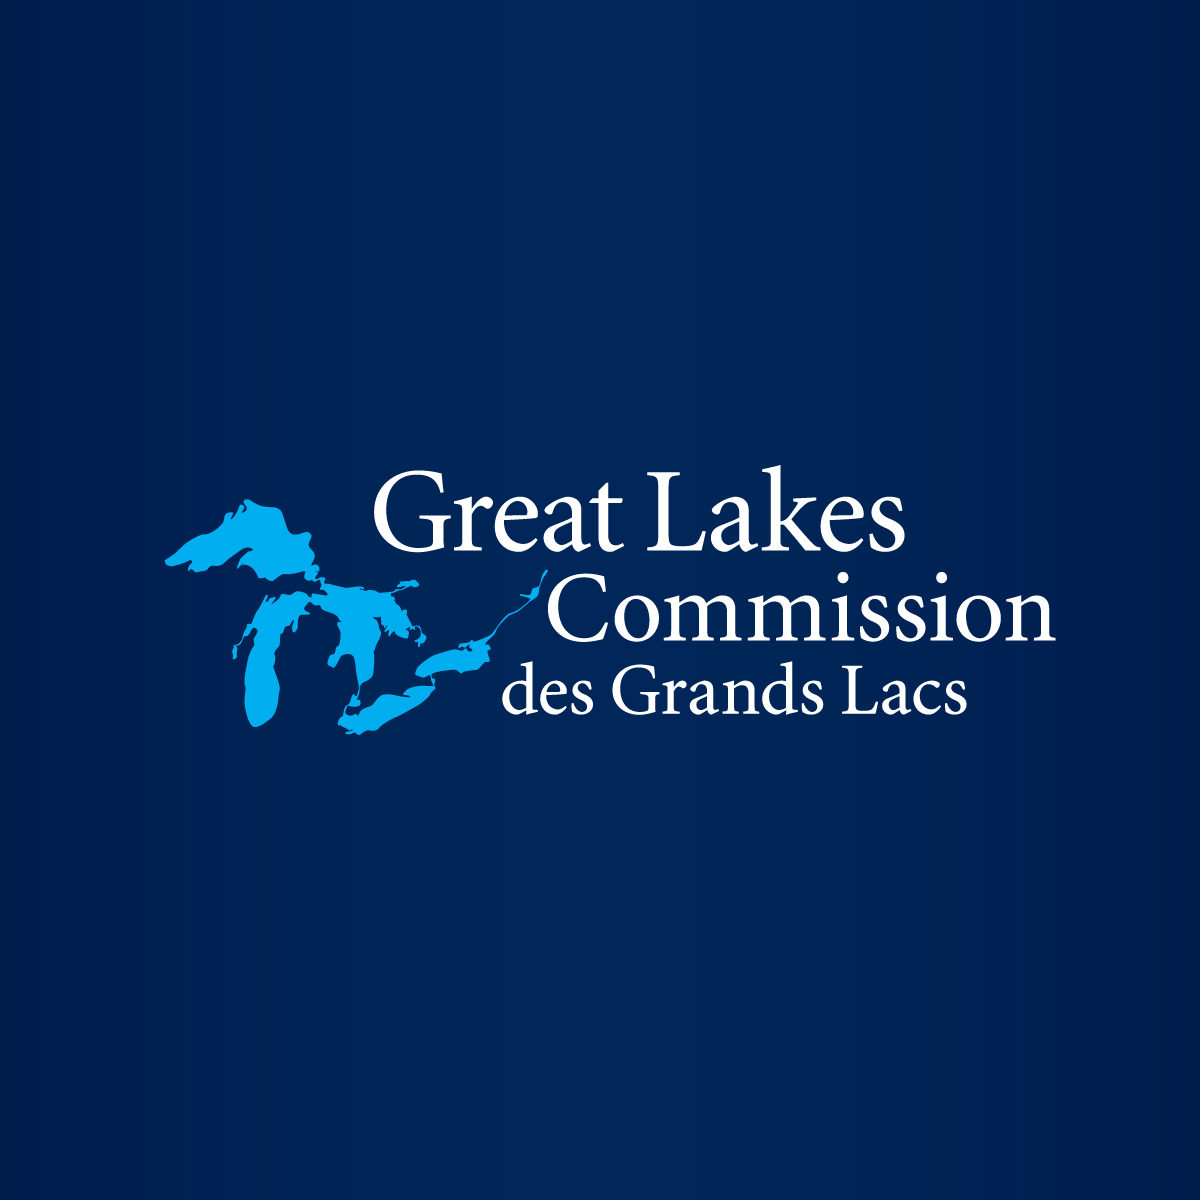 commentary lots of unfinished work after 50 years of effort to restore the great lakes